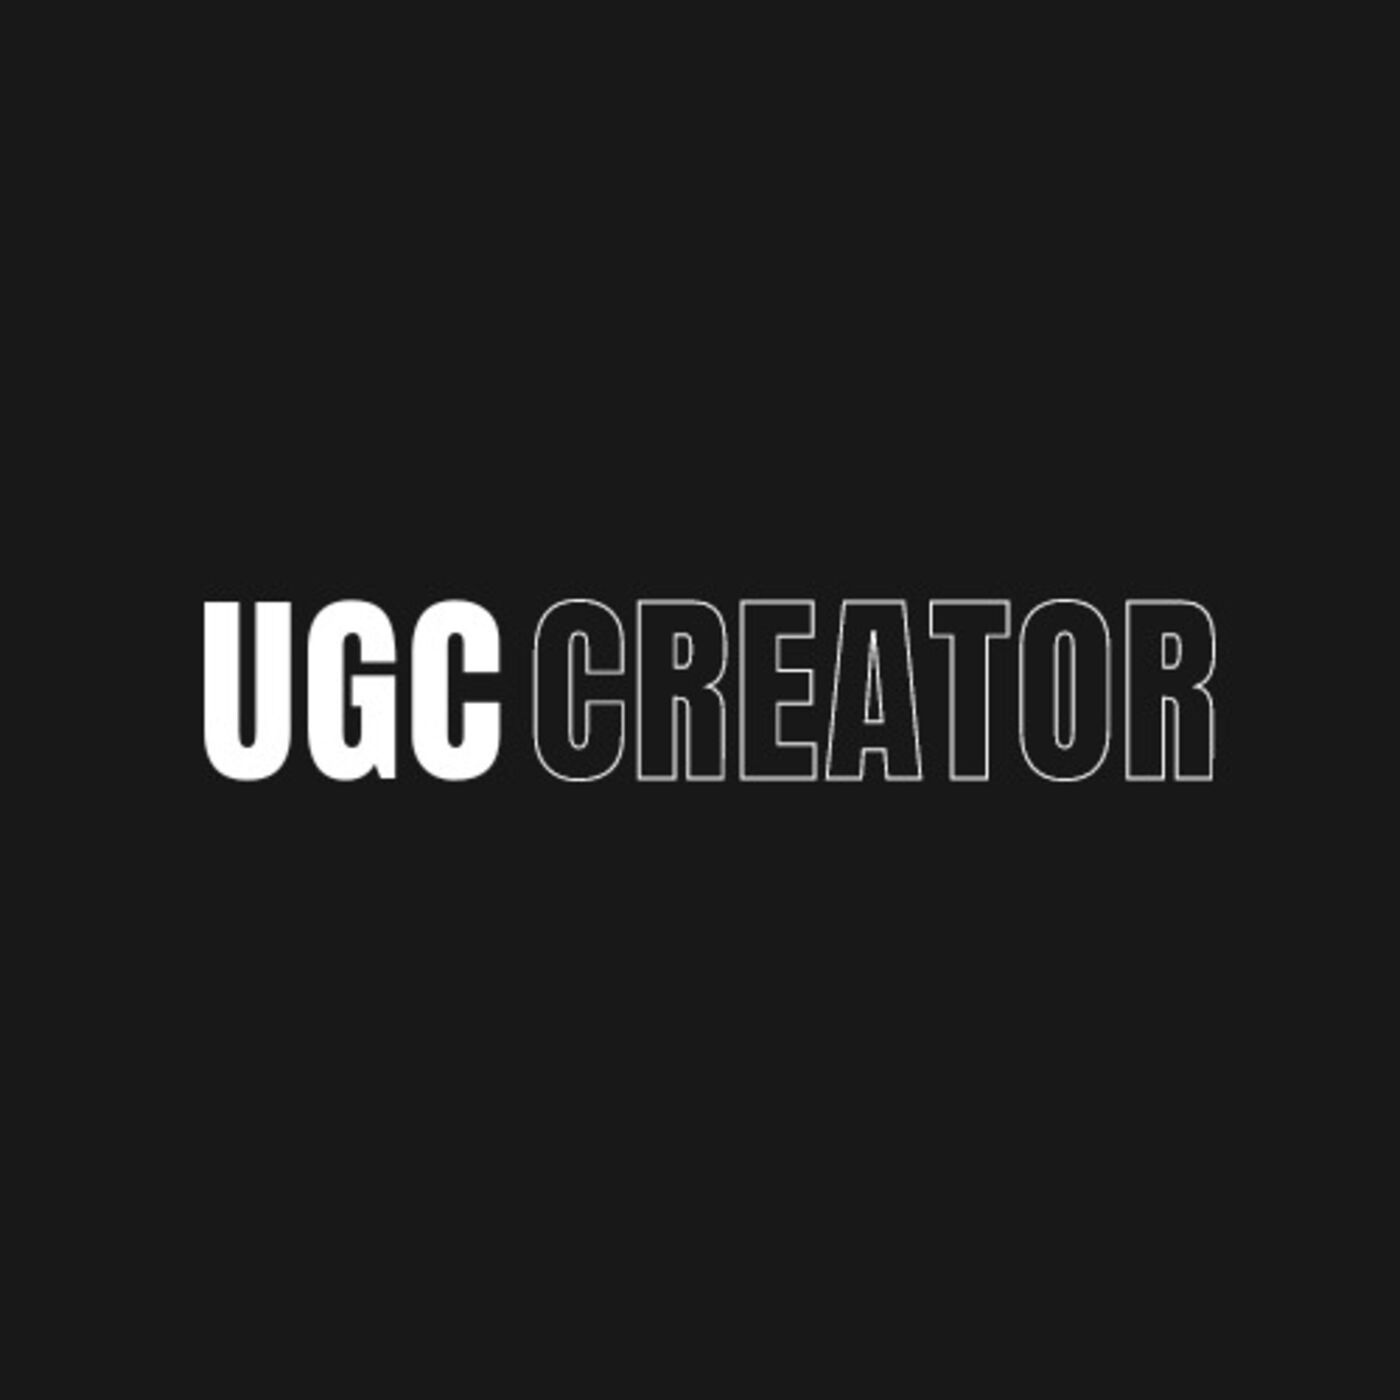 Remote Working As a UGC Video Creator by vctr